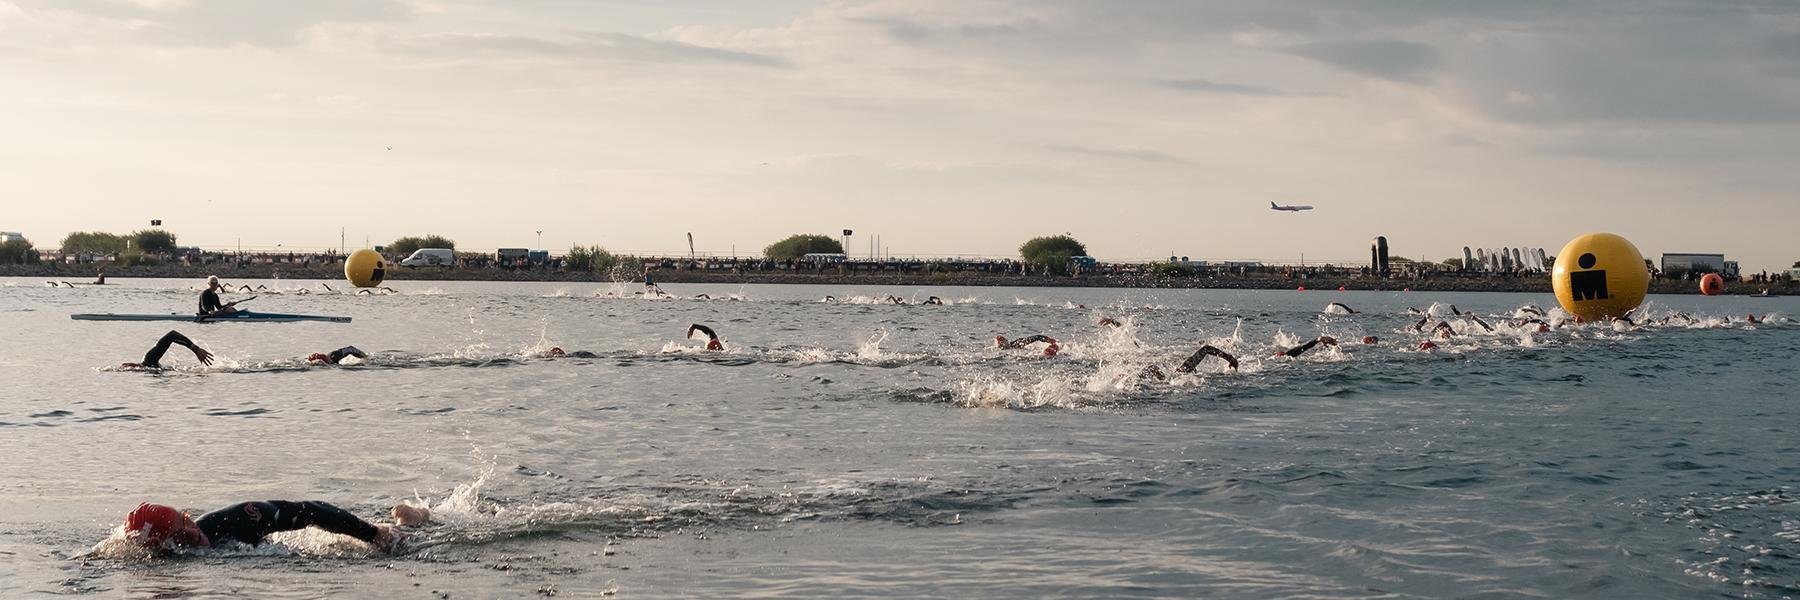 Athletes in the sea at the swim portion of IRONMAN Copenhagen in Denmark